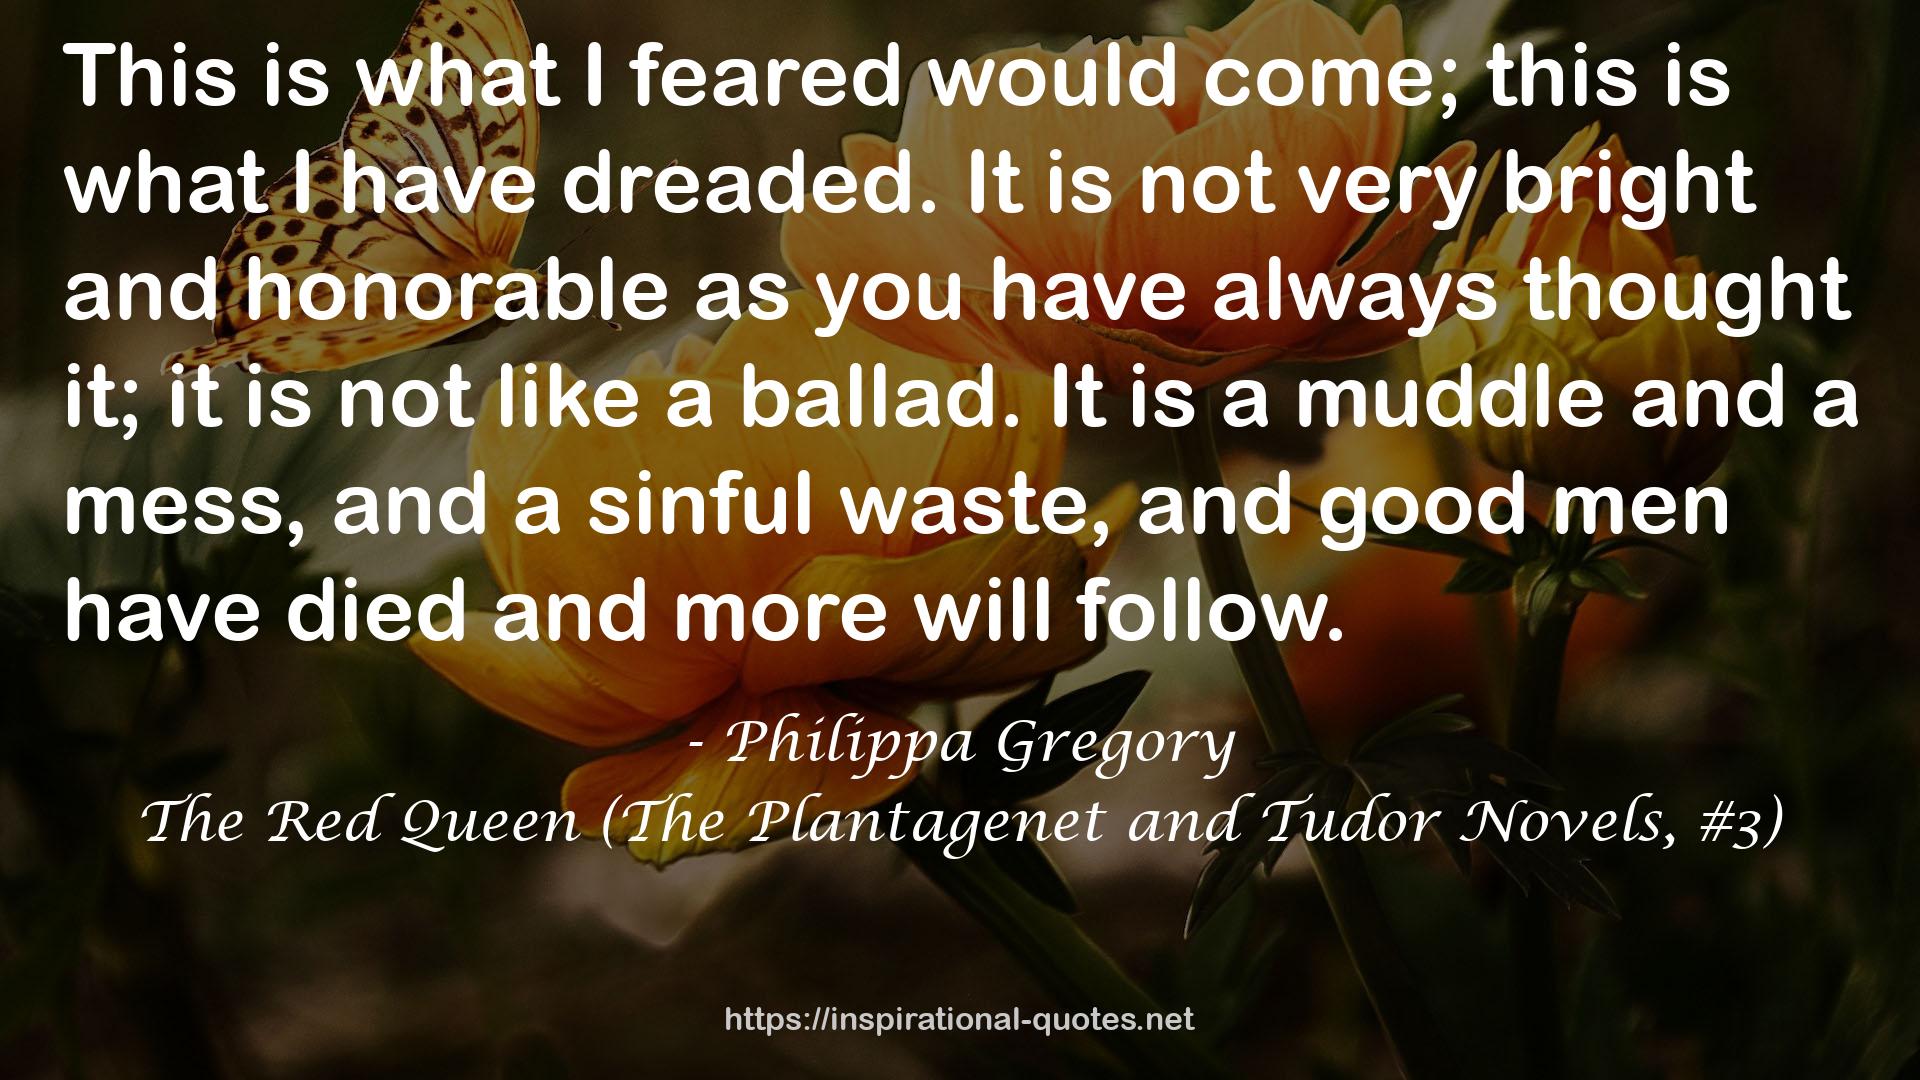 The Red Queen (The Plantagenet and Tudor Novels, #3) QUOTES